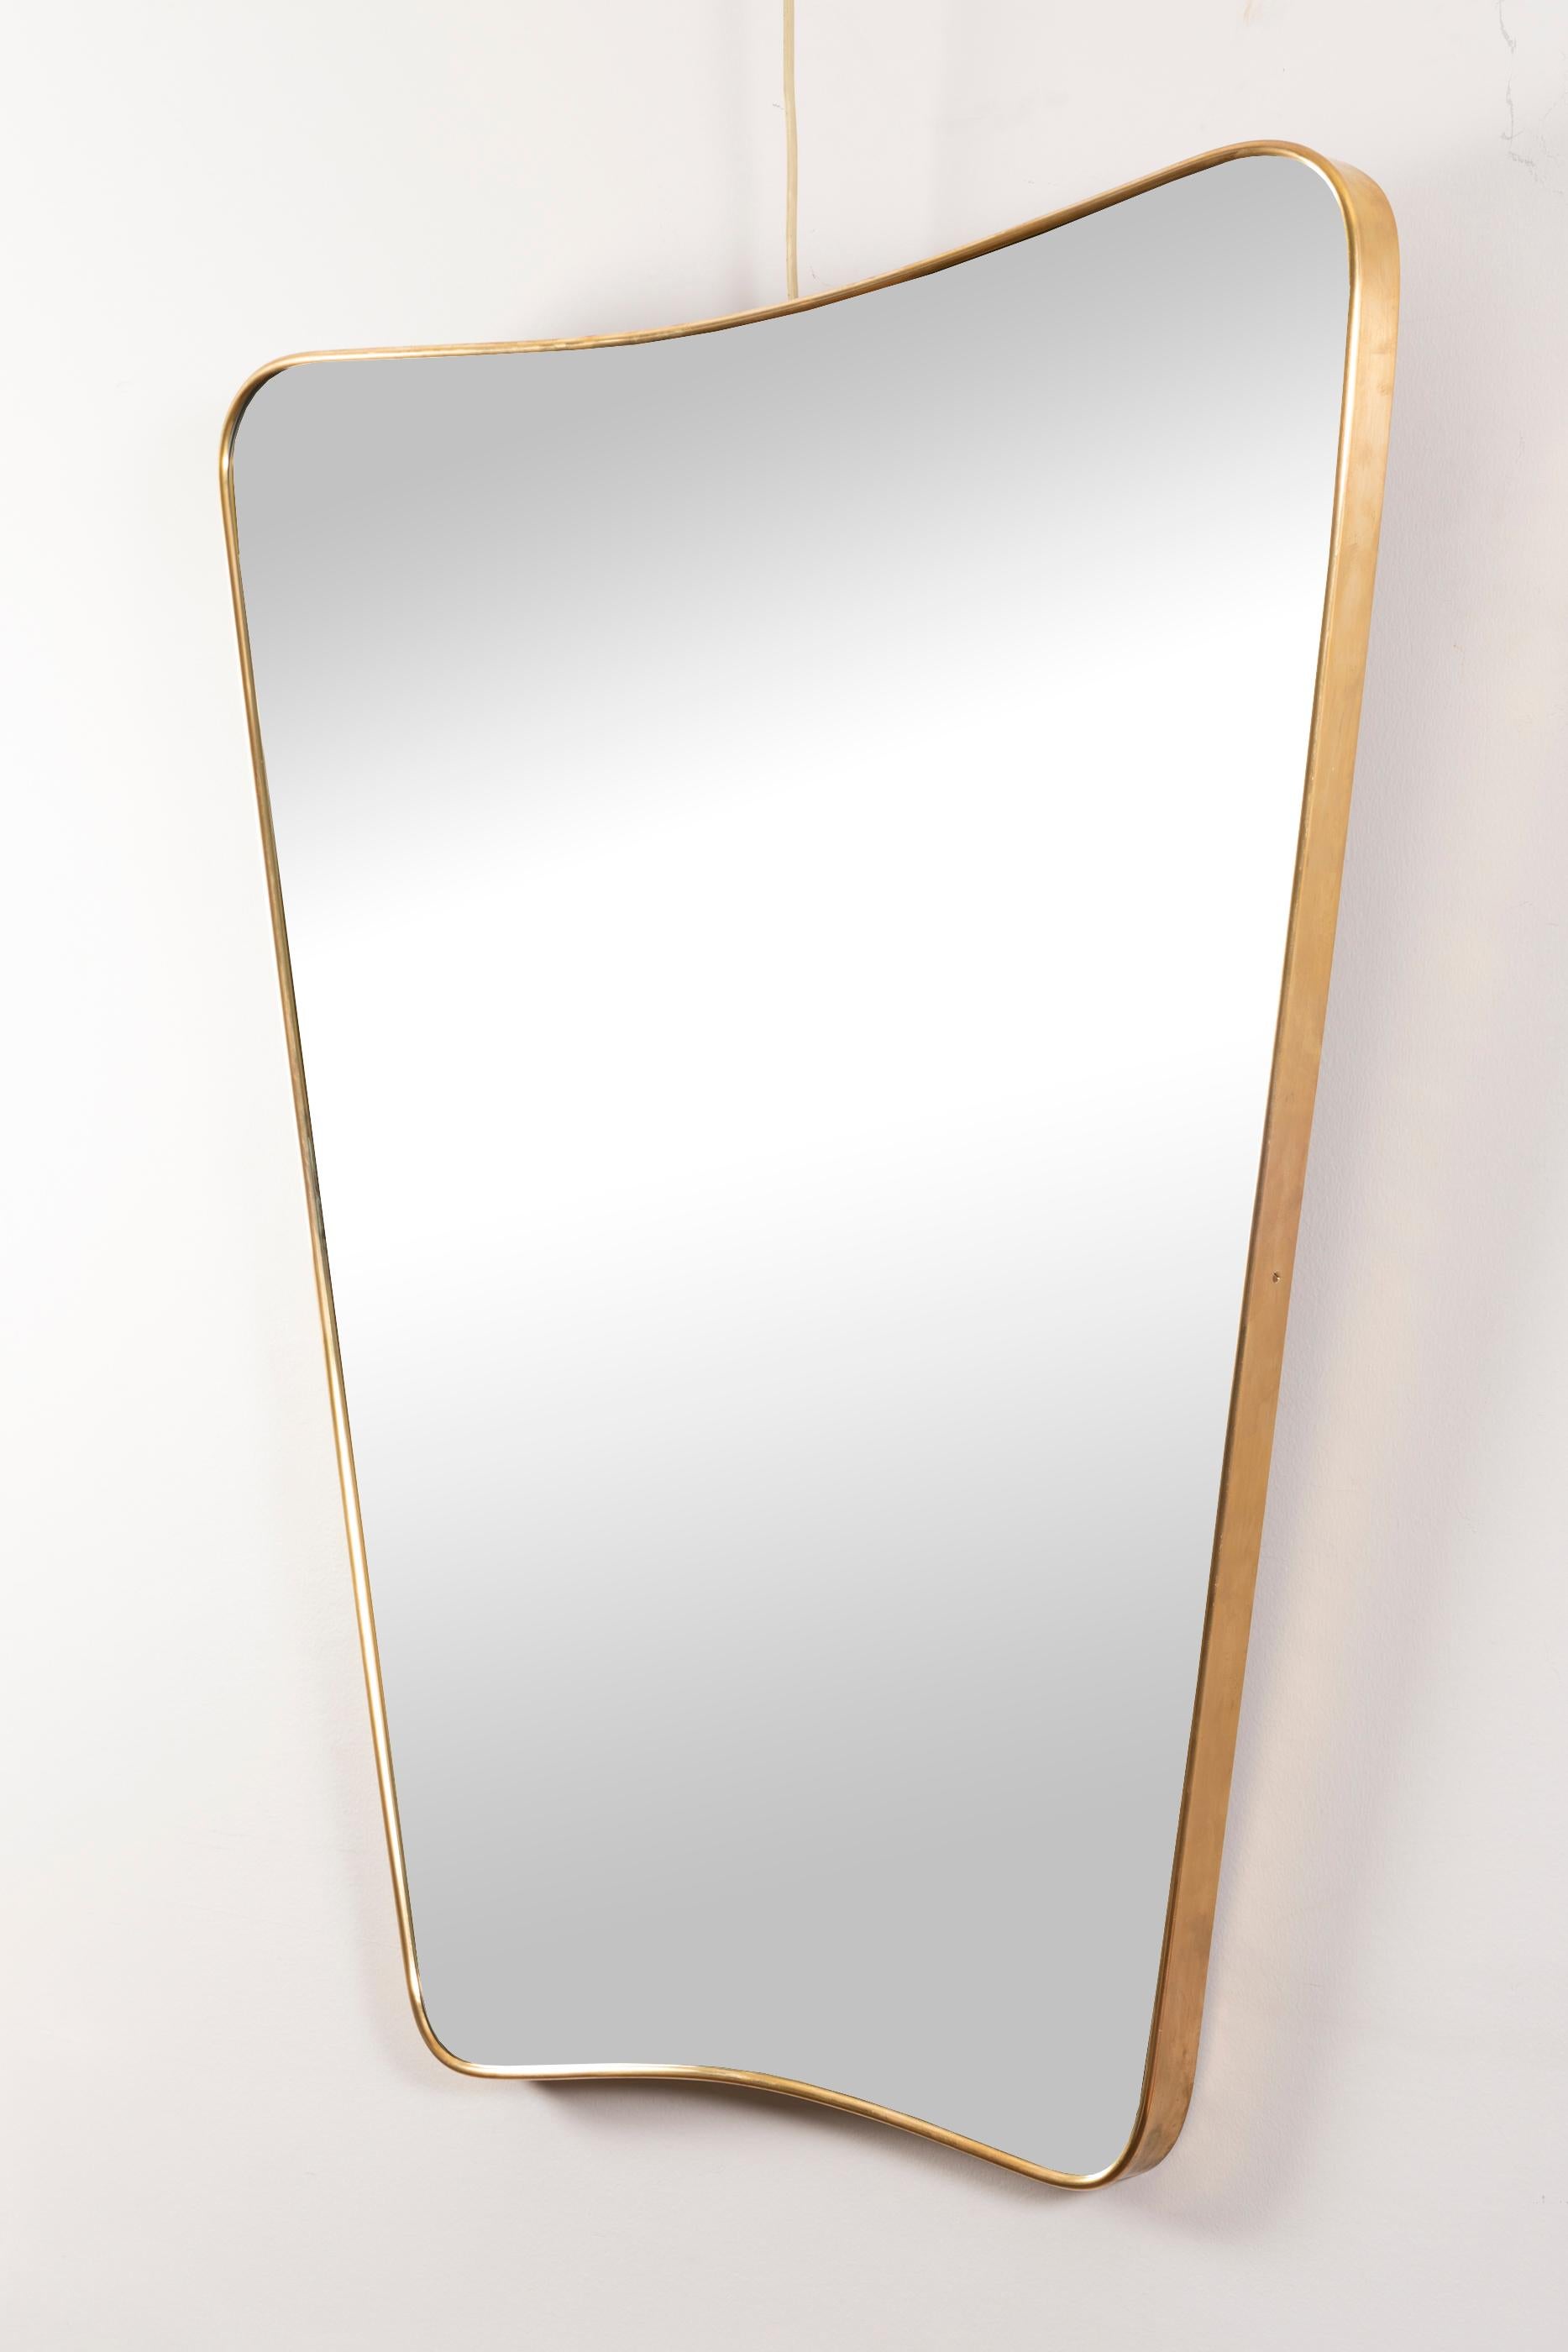 Wall mirror, brass frame,
in the style of Gio Ponti,
Italy, circa 1955. 

Measures: H 91 cm (28.3 in.)
W 80 cm (18.1 in.)
D 3 cm (1.18 in.)